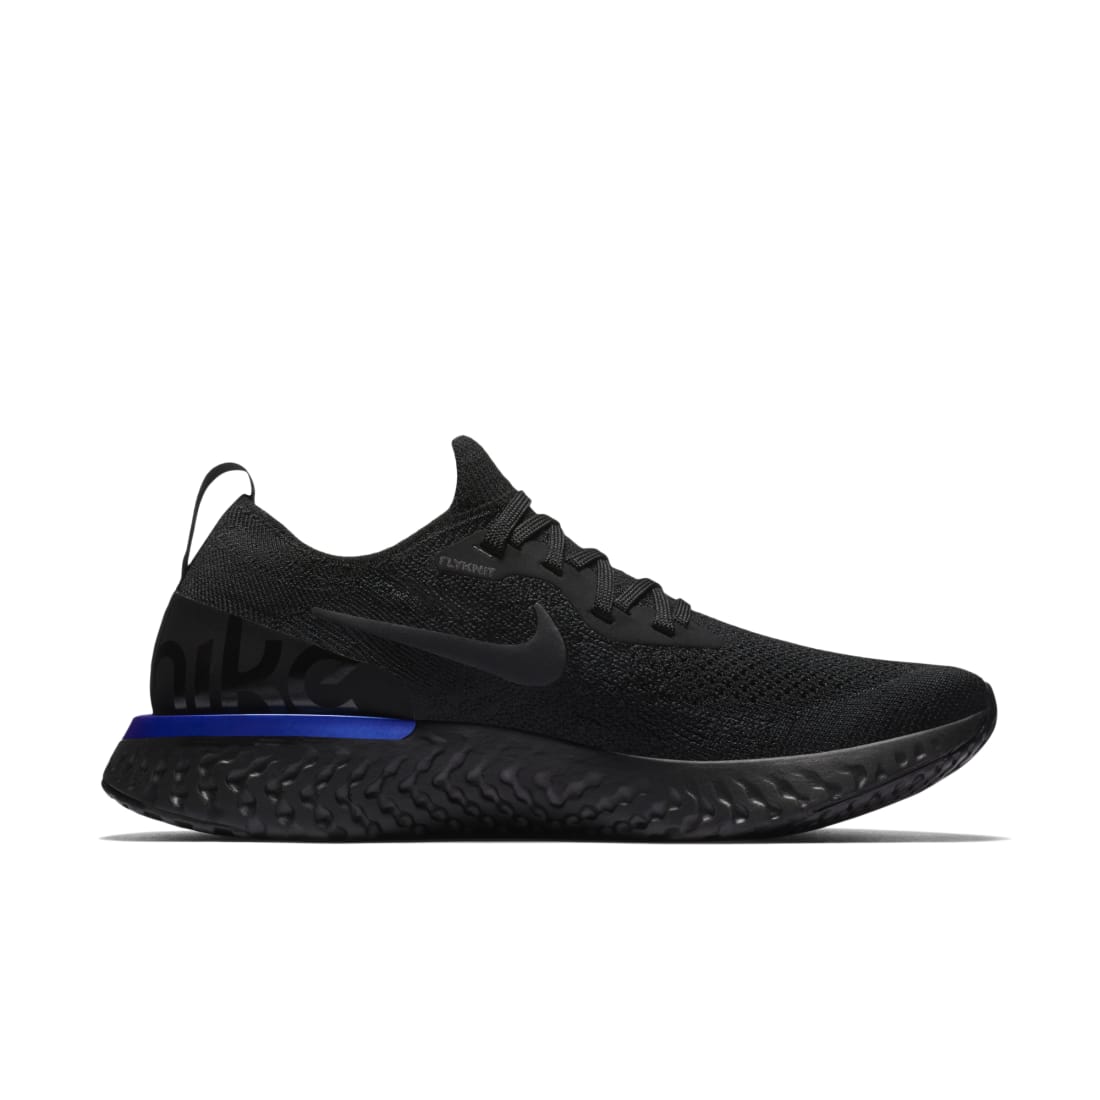 Nike Epic React Flyknit Black Racer Blue | Nike | Sole Collector